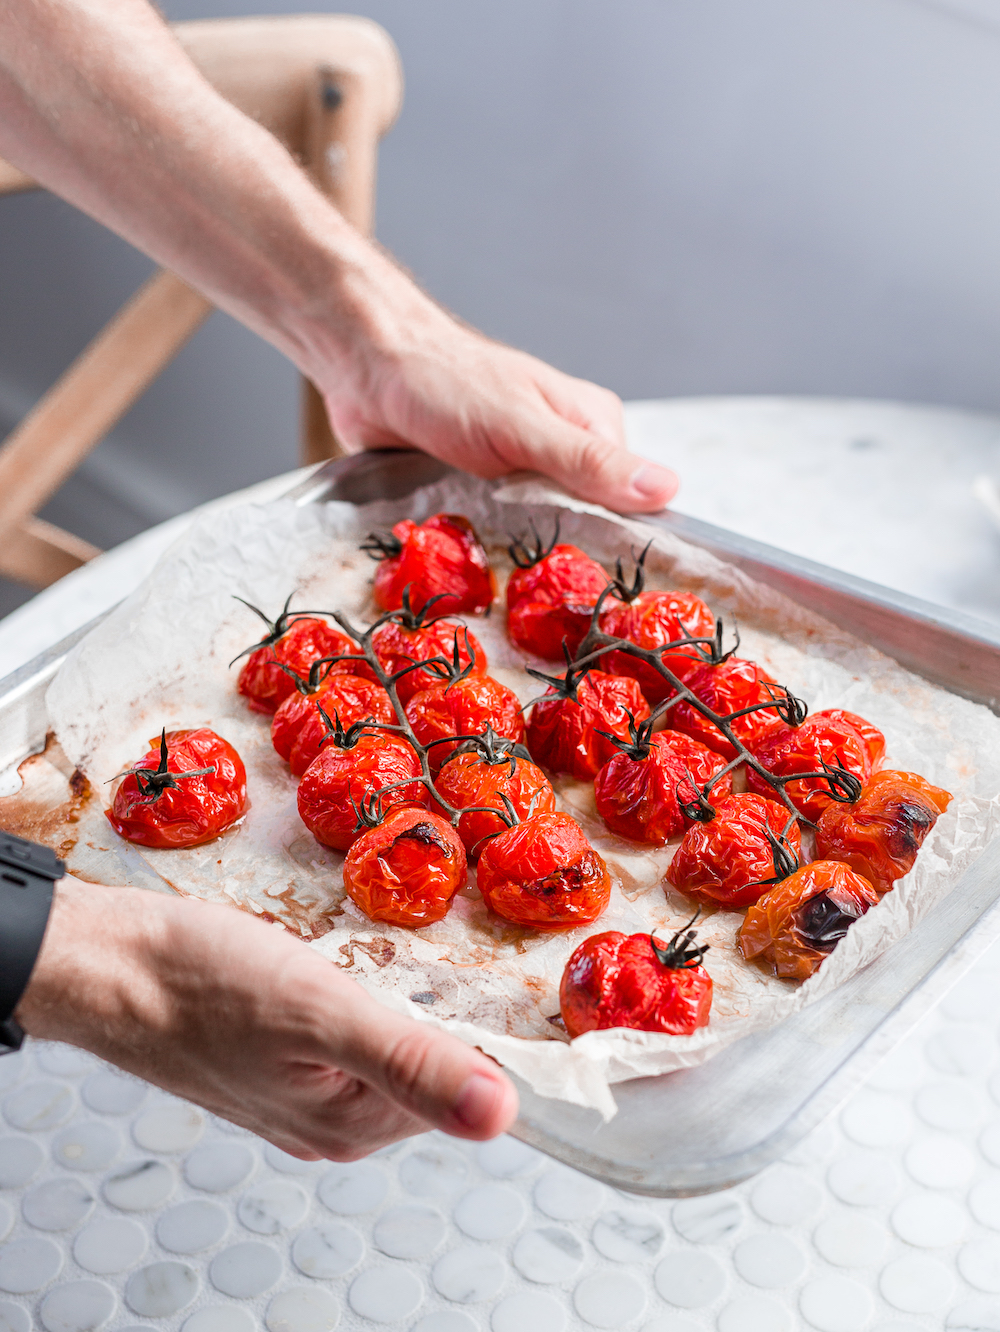 10 Delicious Reasons to Keep Your Fridge Stocked With Tomatoes